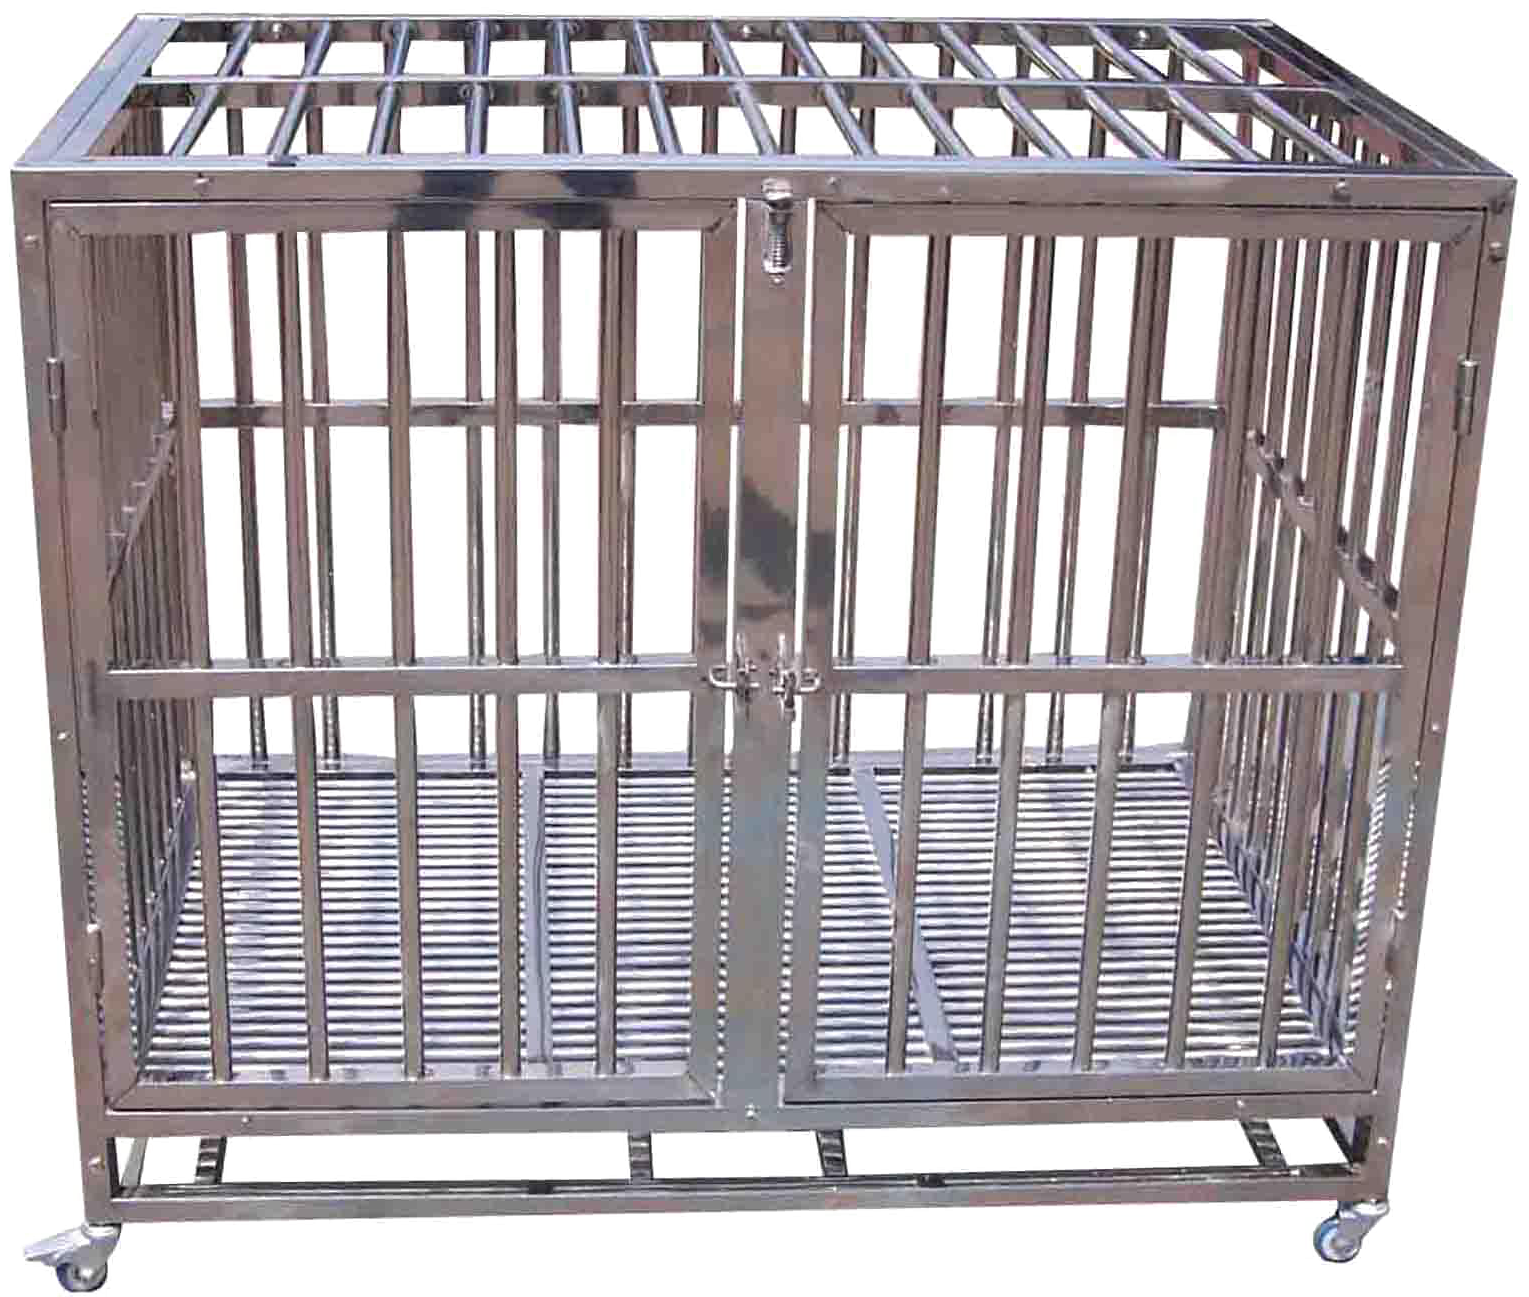 A Metal Cage With Doors